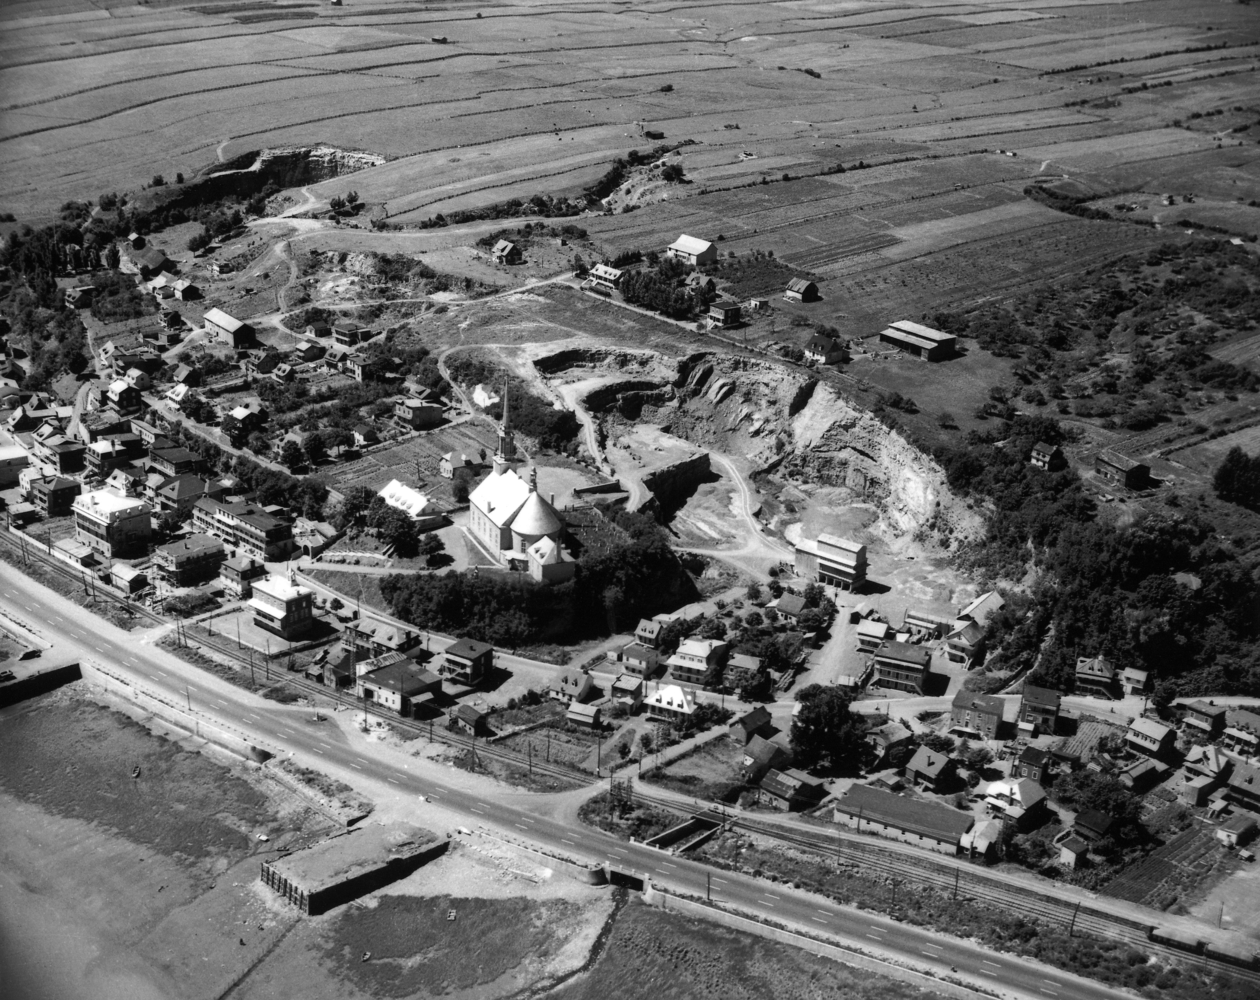 Black and white archival photo. The municipality of Château-Richer radiates around the church, seen in the centre of the picture. In addition to houses, we can see a stone quarry, cultivated fields, a railroad track, and Boulevard Sainte-Anne.